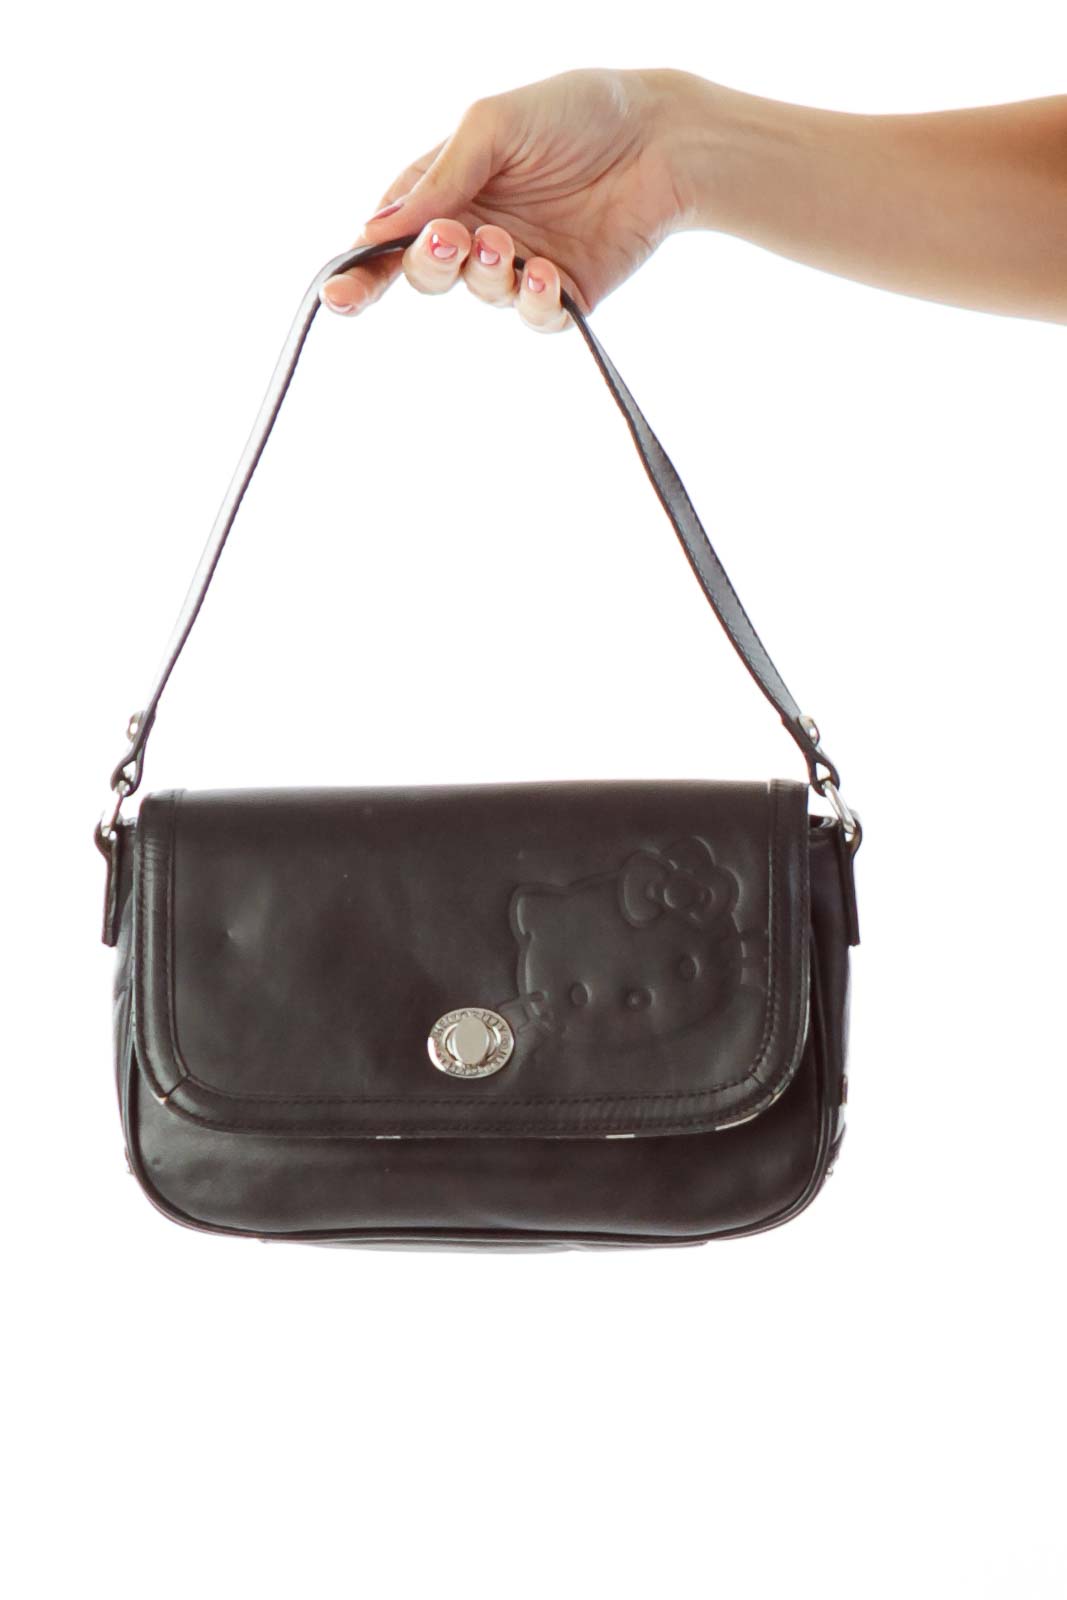 Hello Kitty - Black Leather Hello Kitty Shoulder Bag Unknown